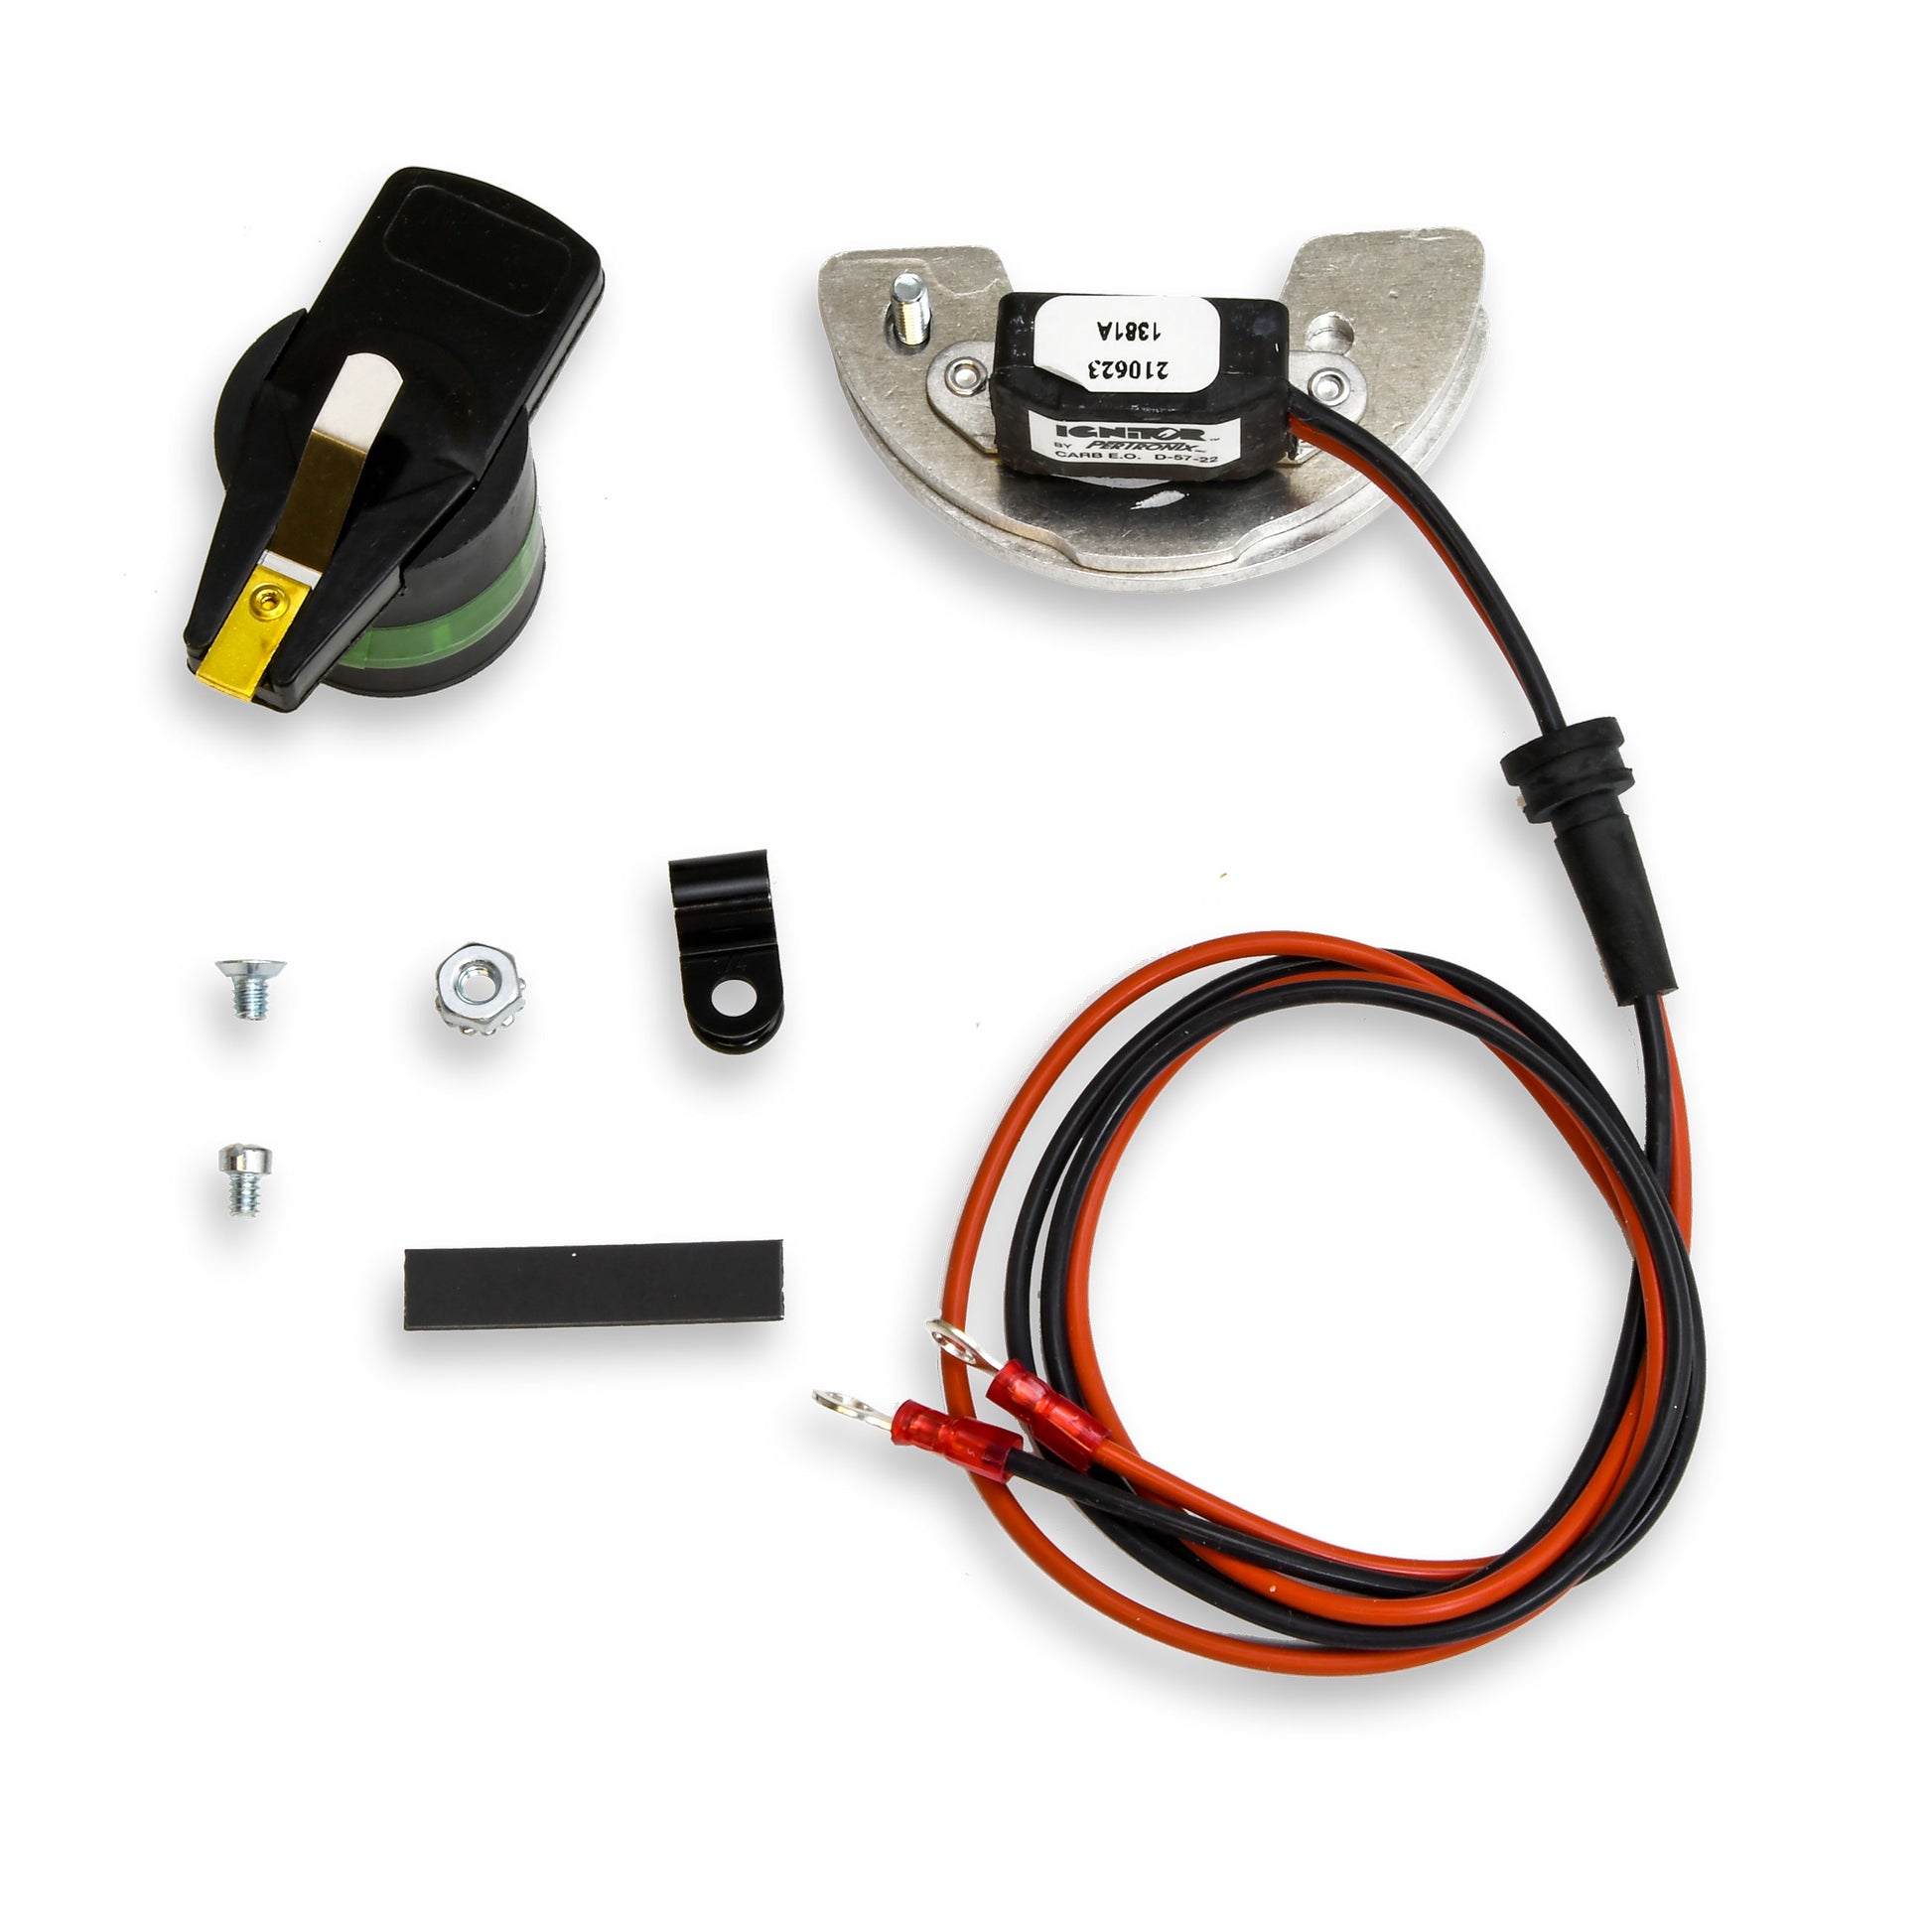 PerTronix Ignitor Electronic Ignition Conversion Kit-1381A
